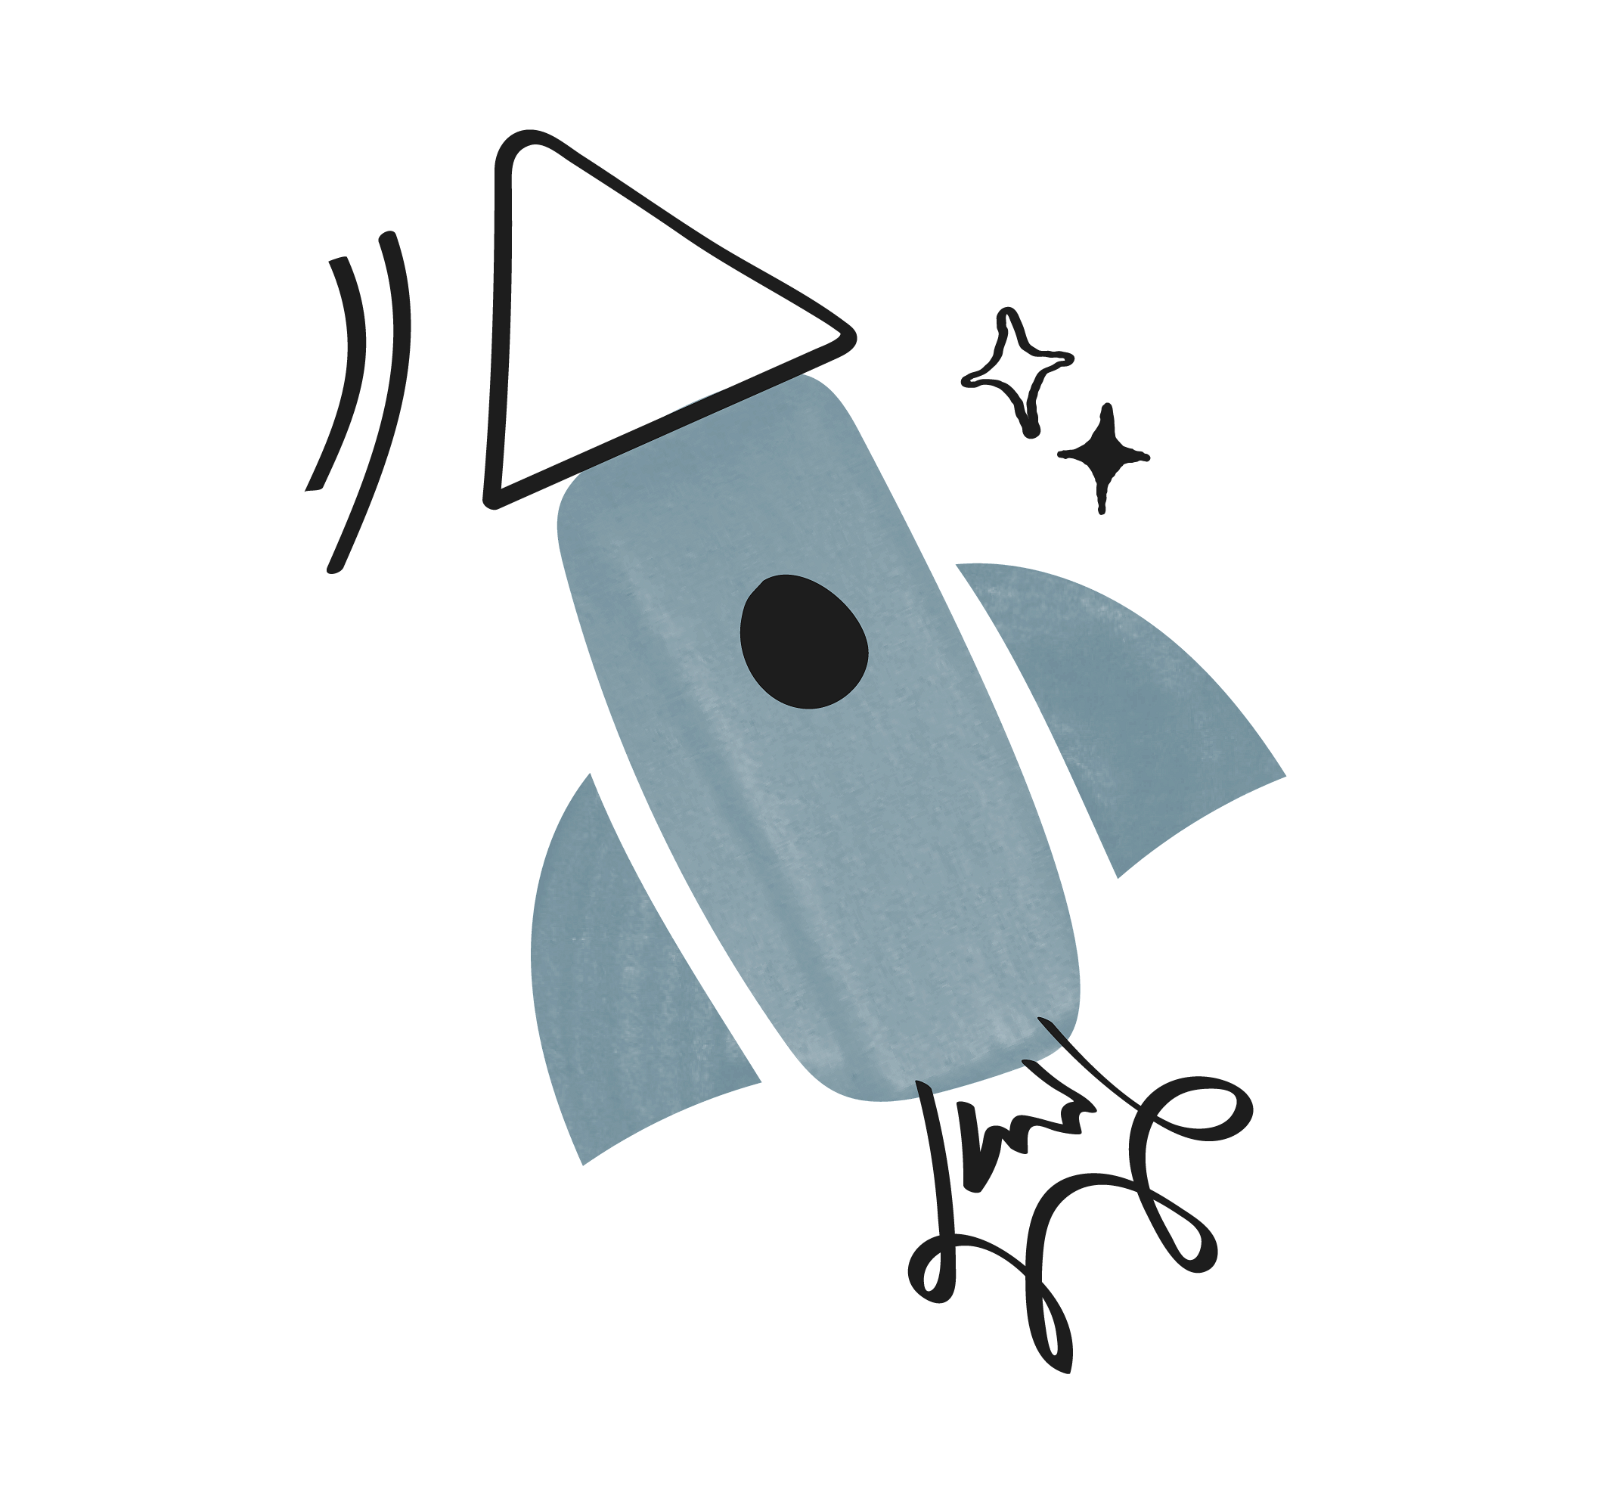 abstract illustration of a little blue space rocket